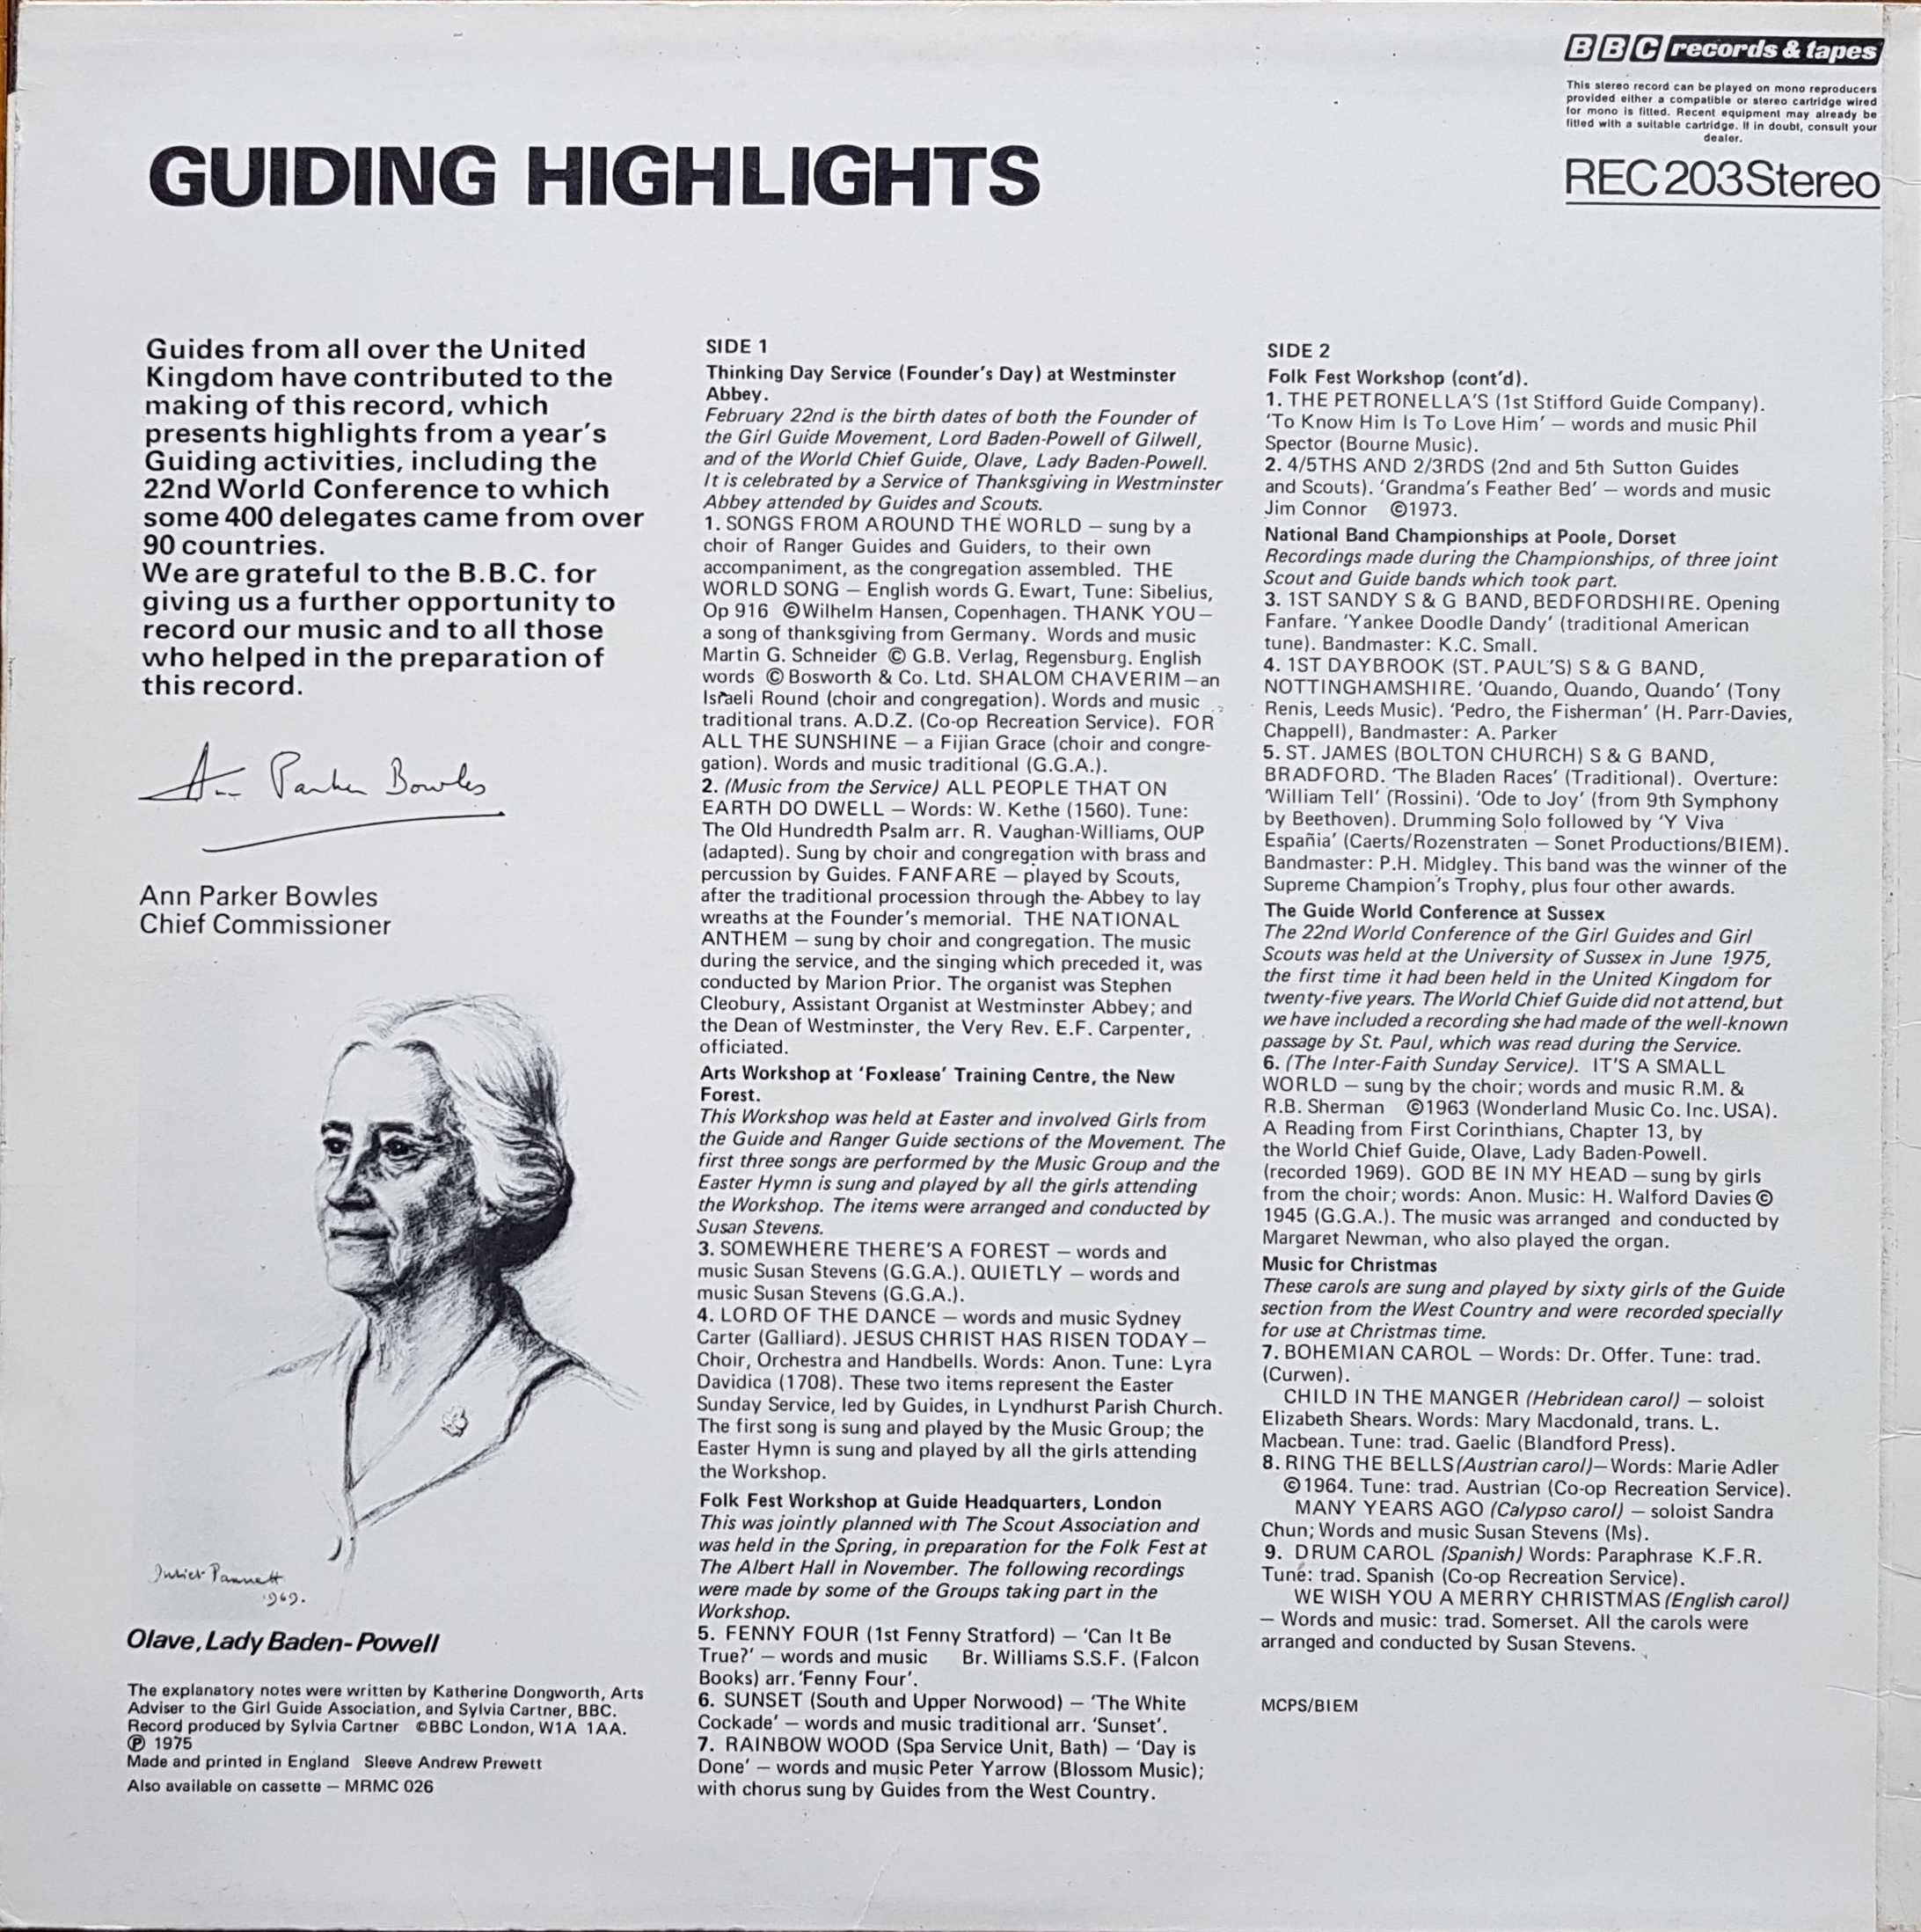 Picture of REC 203 Guiding highlights by artist Various from the BBC records and Tapes library